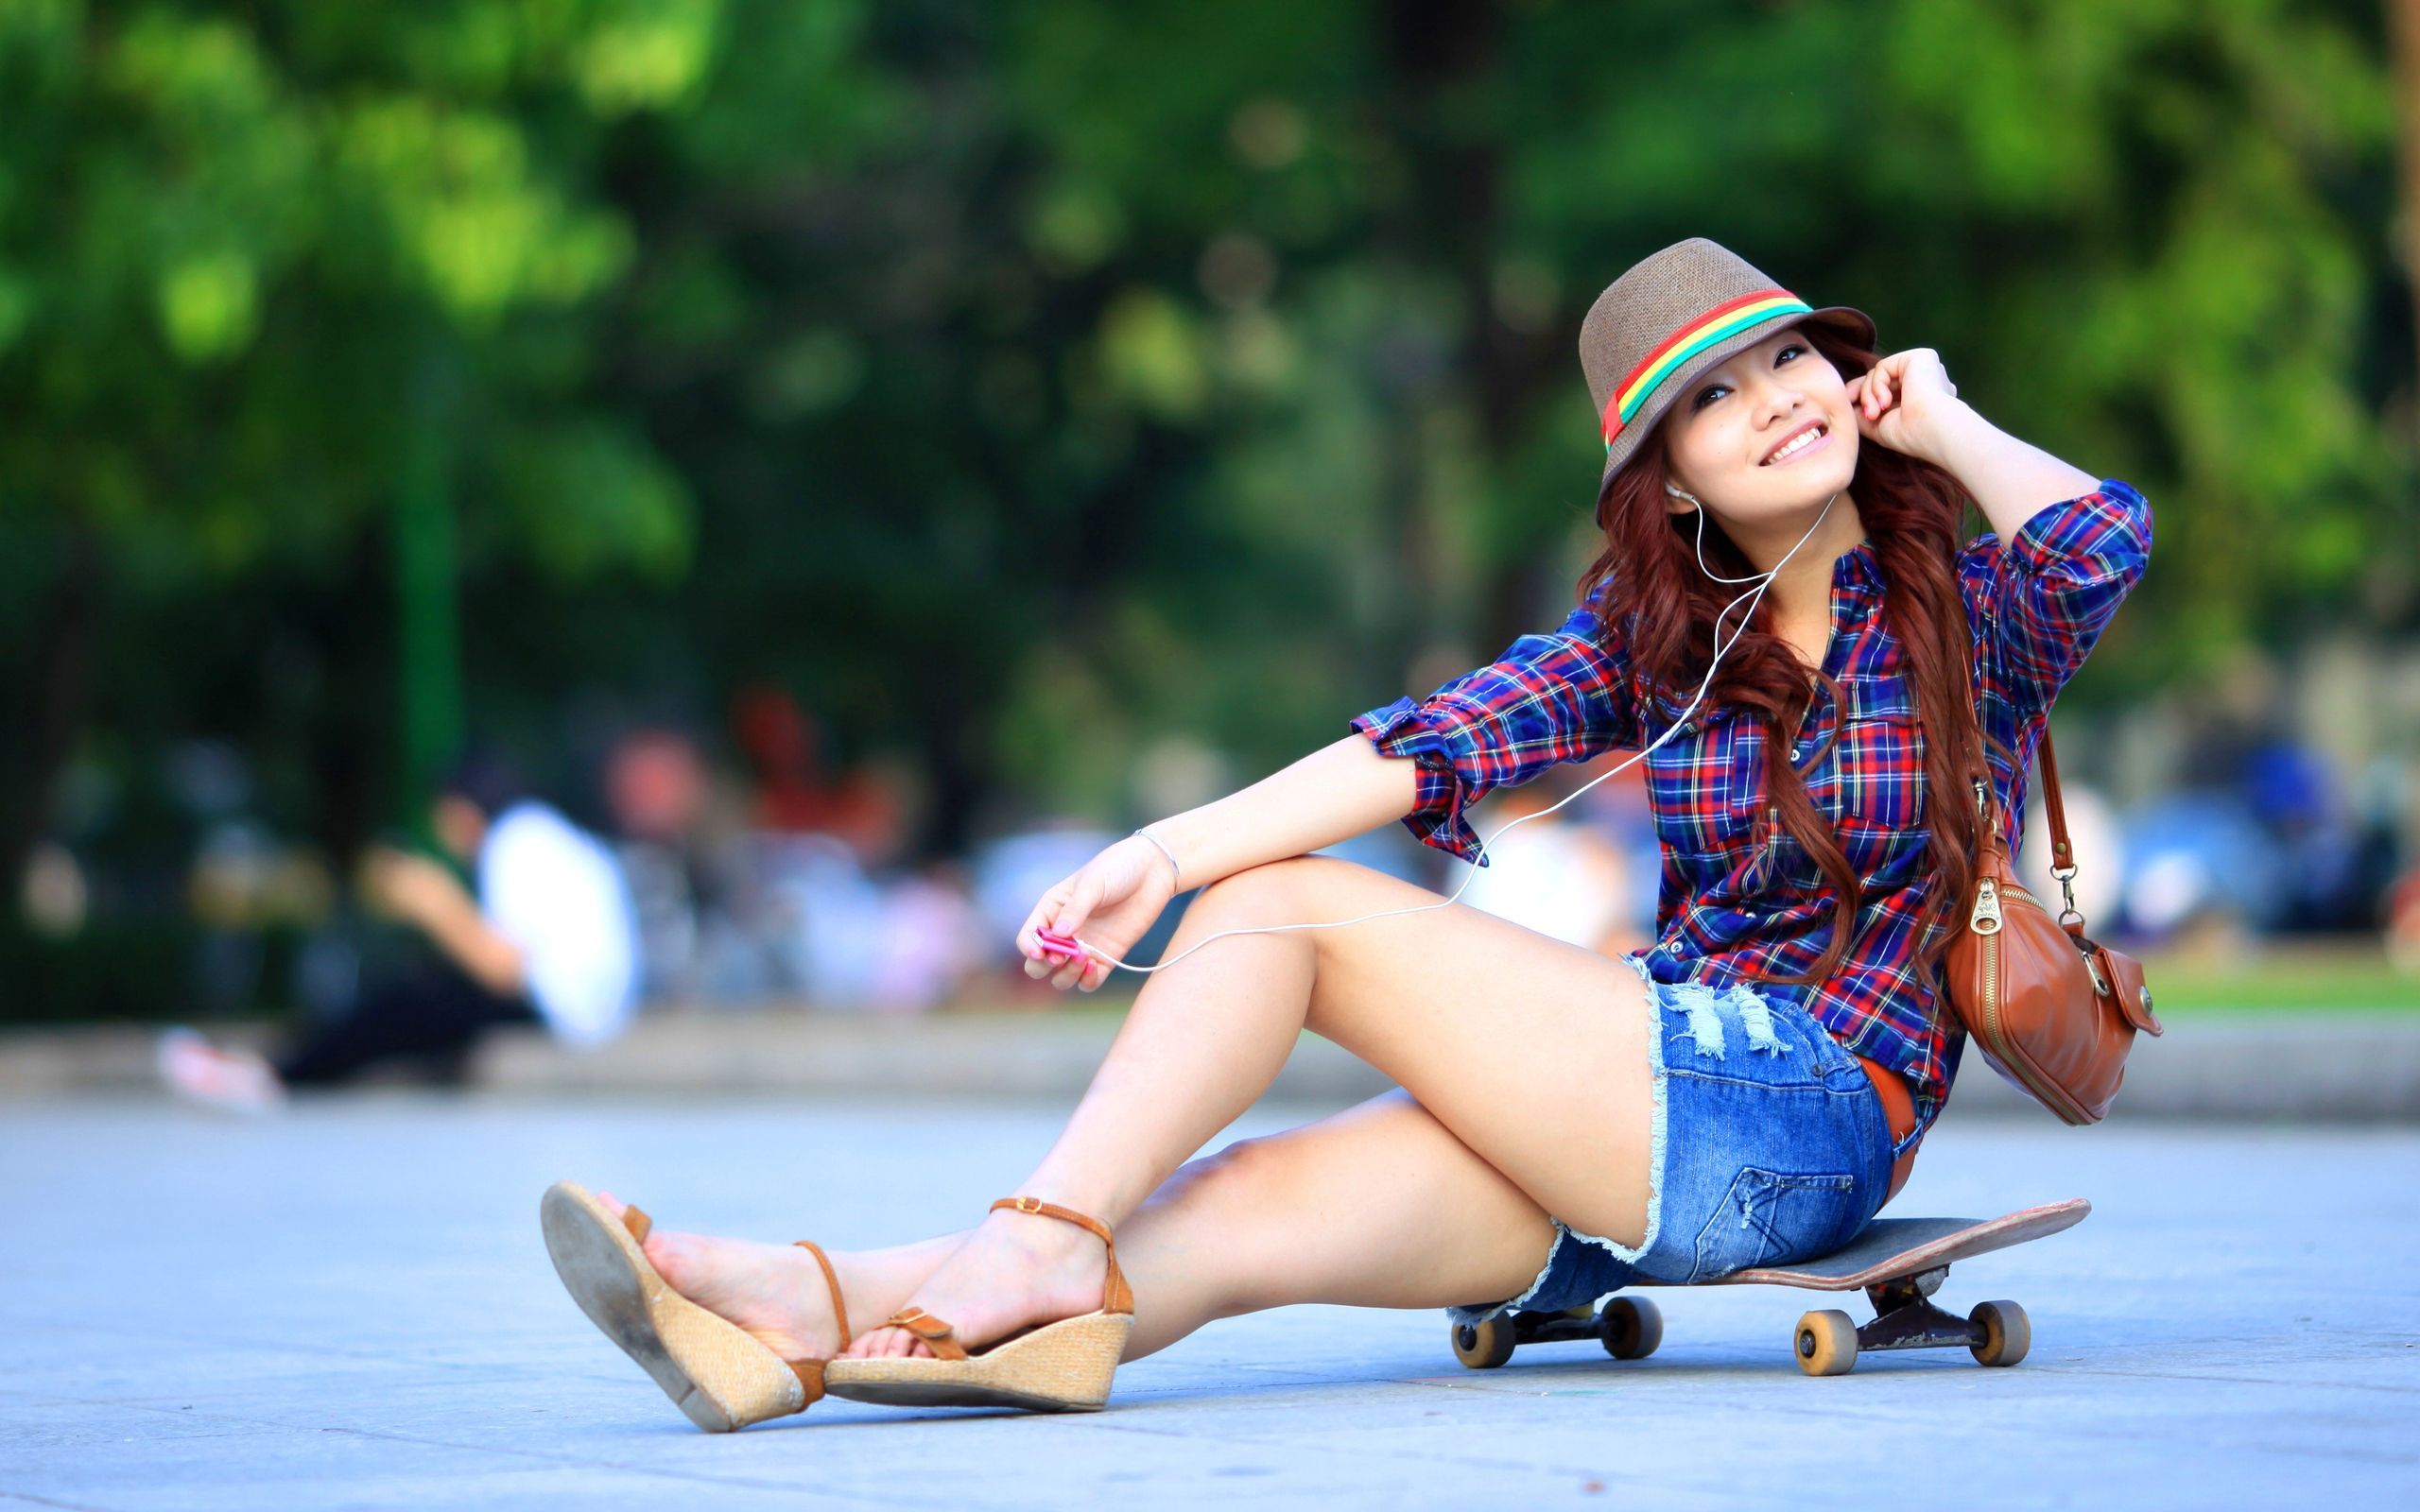 Skateboard Background Wallpapers WIN10 THEMES